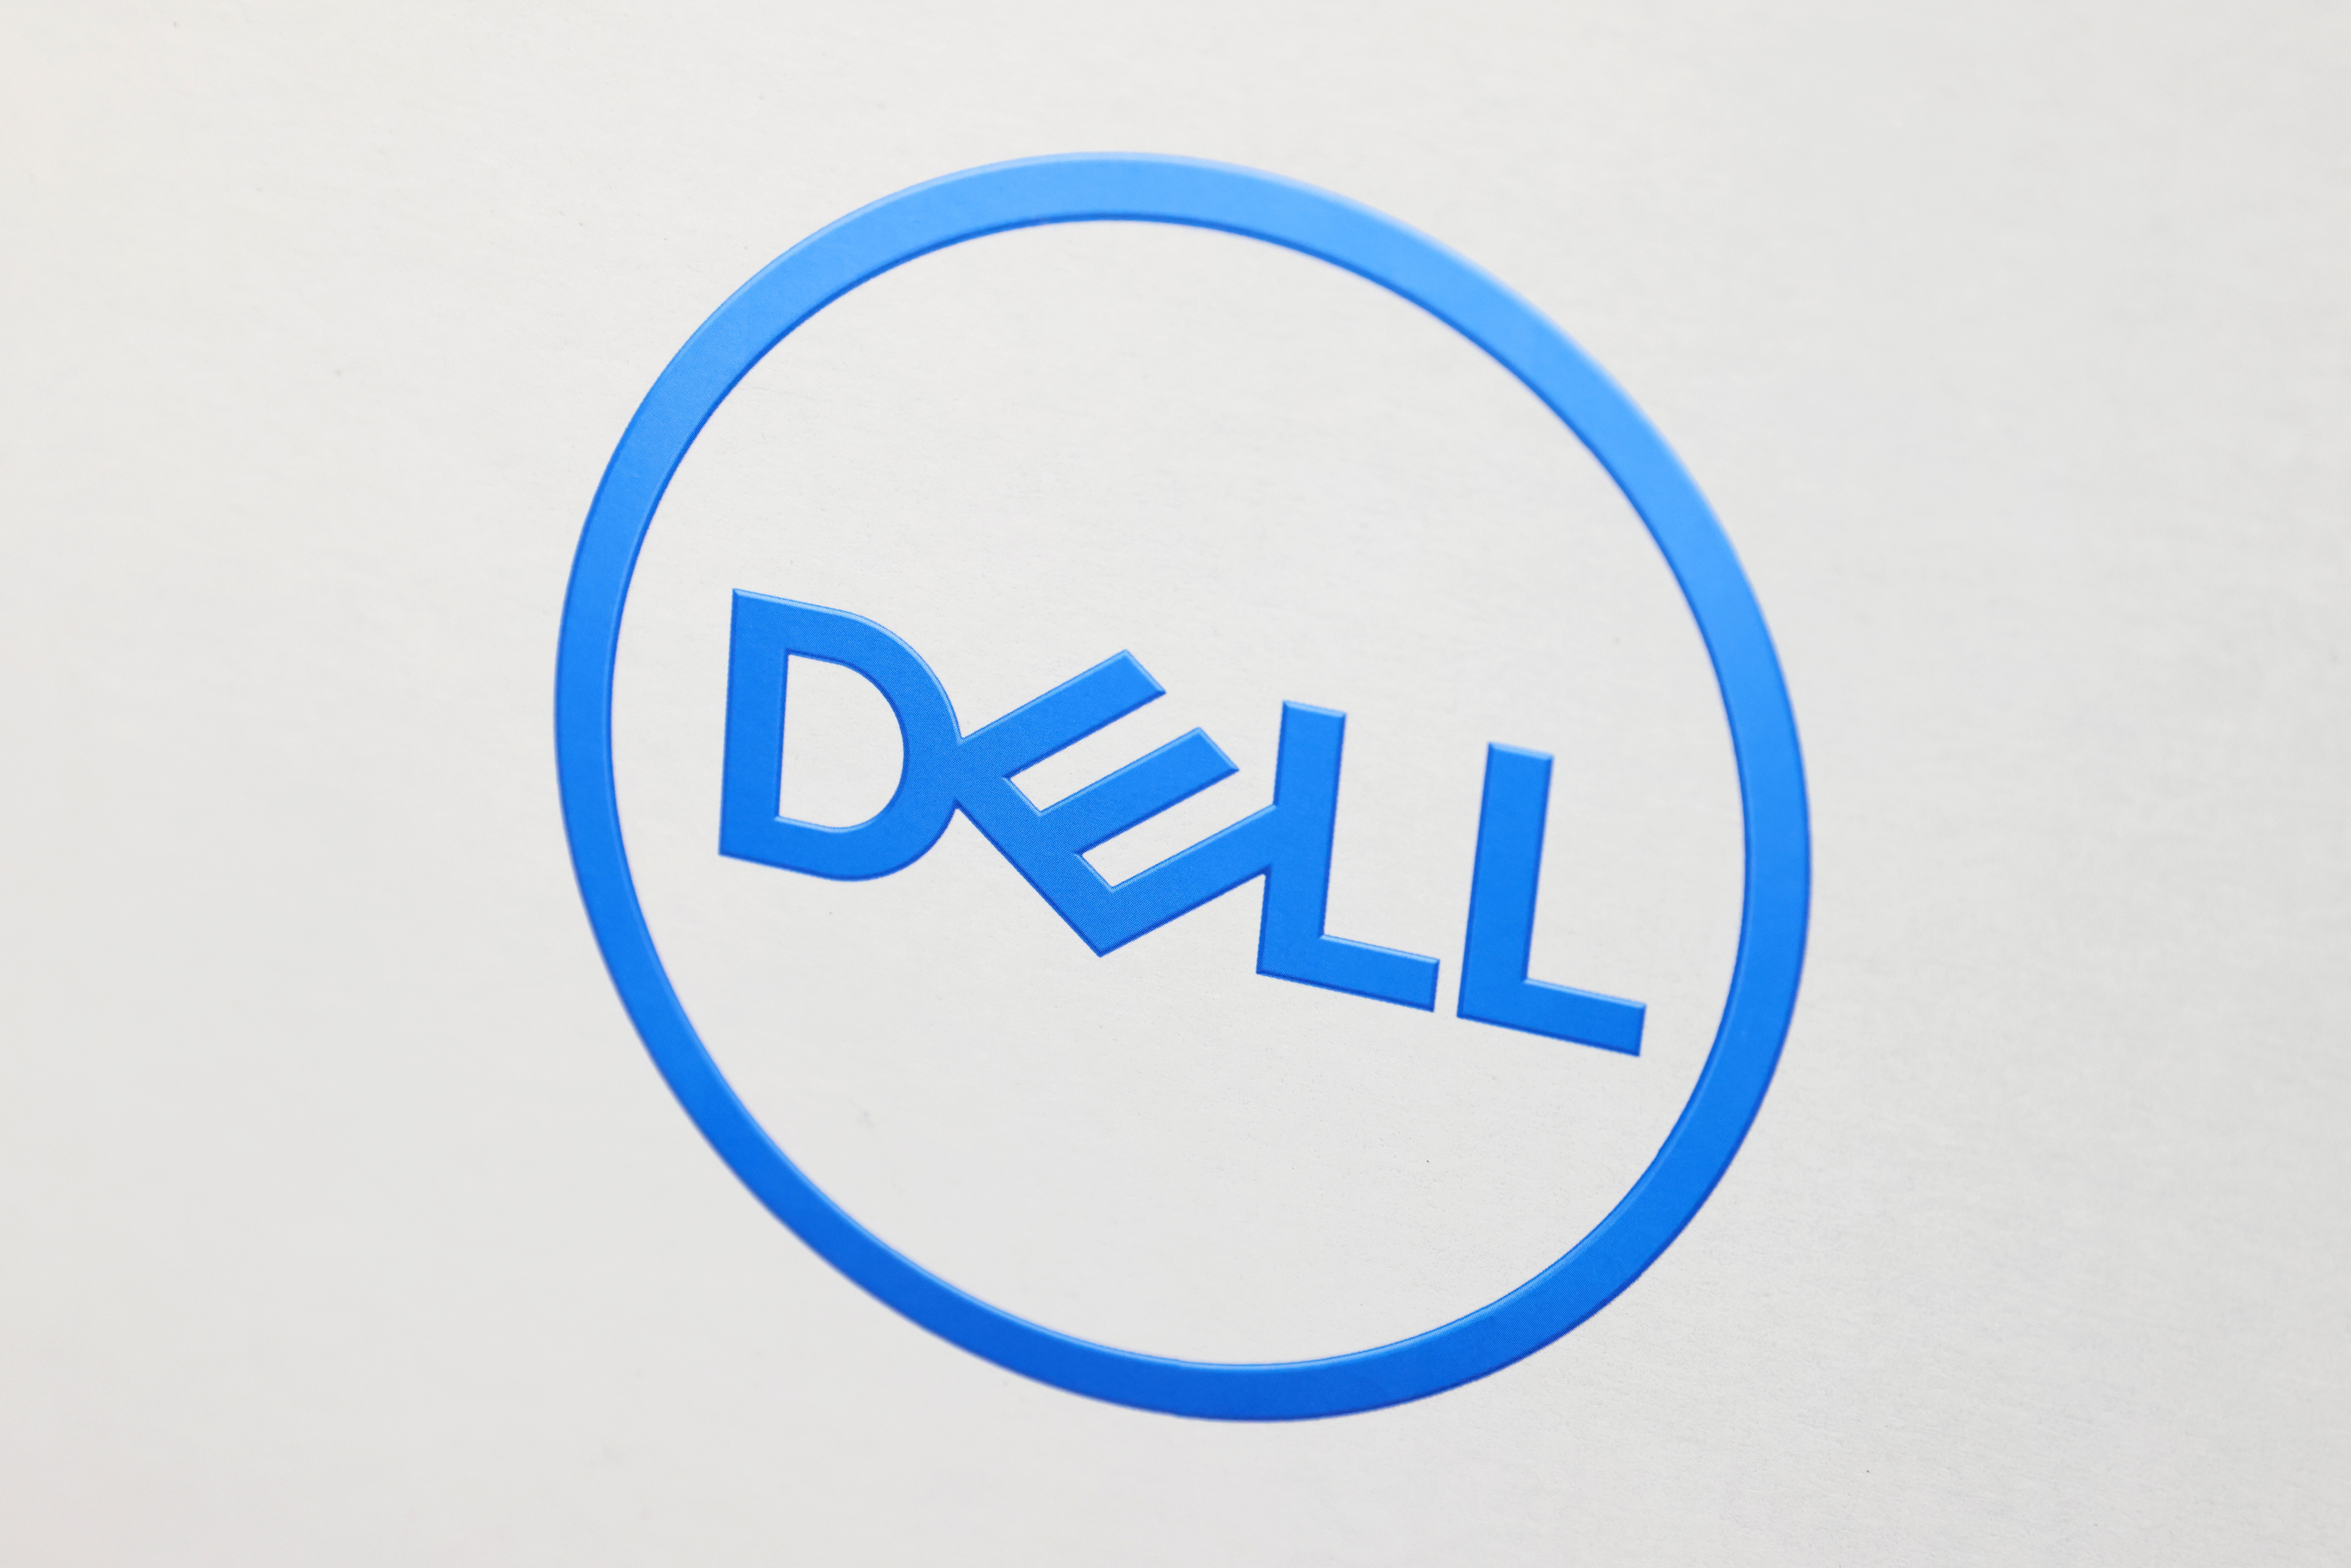 The Dell logo is seen on an item for sale in a store in Manhattan, New York City